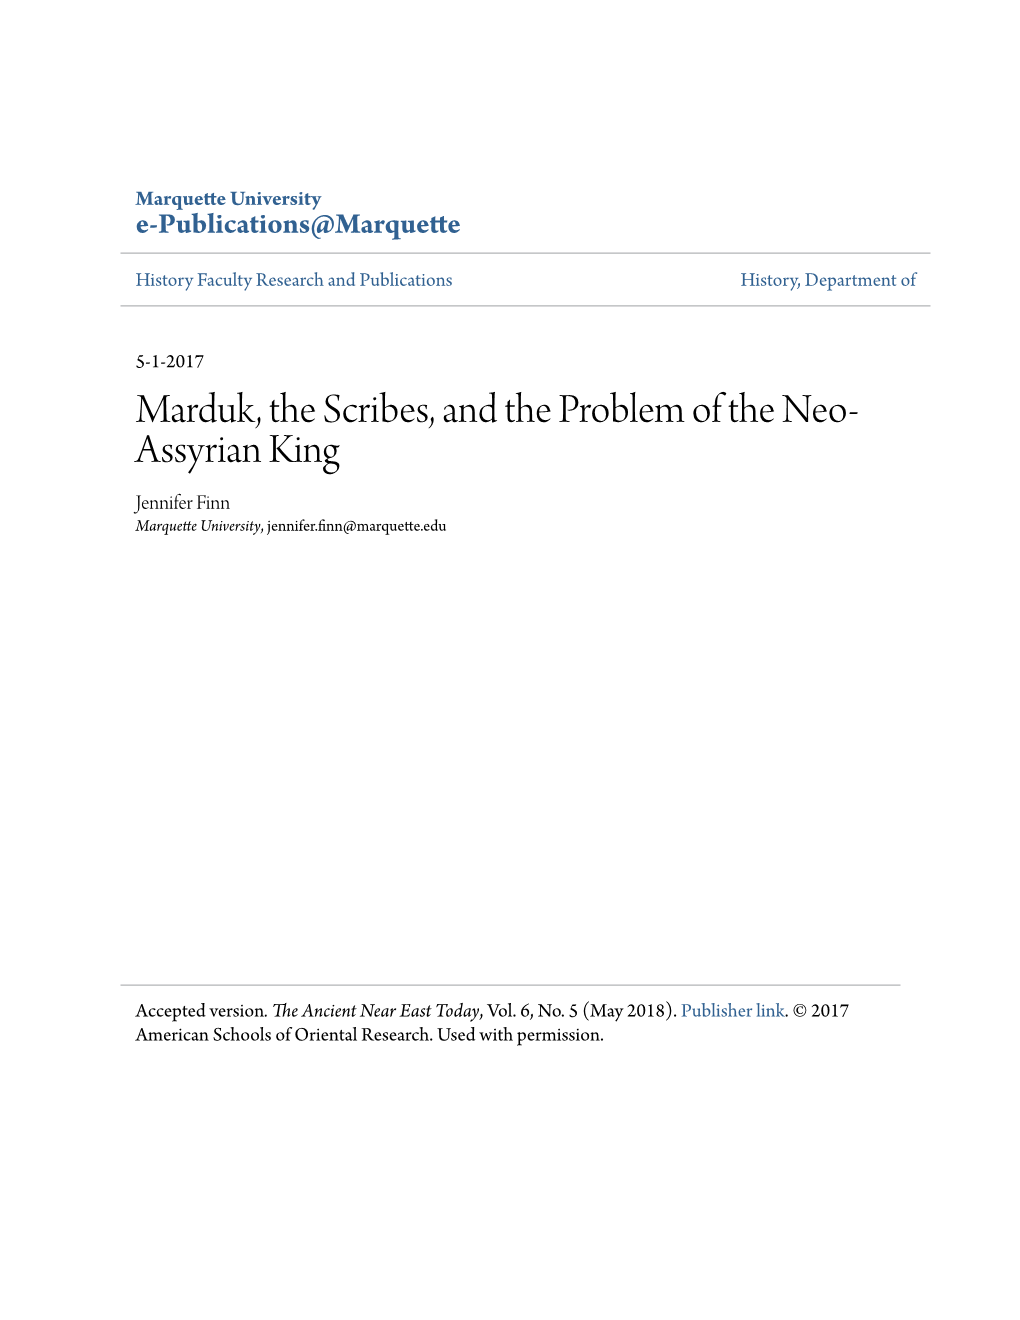 Marduk, the Scribes, and the Problem of the Neo-Assyrian King